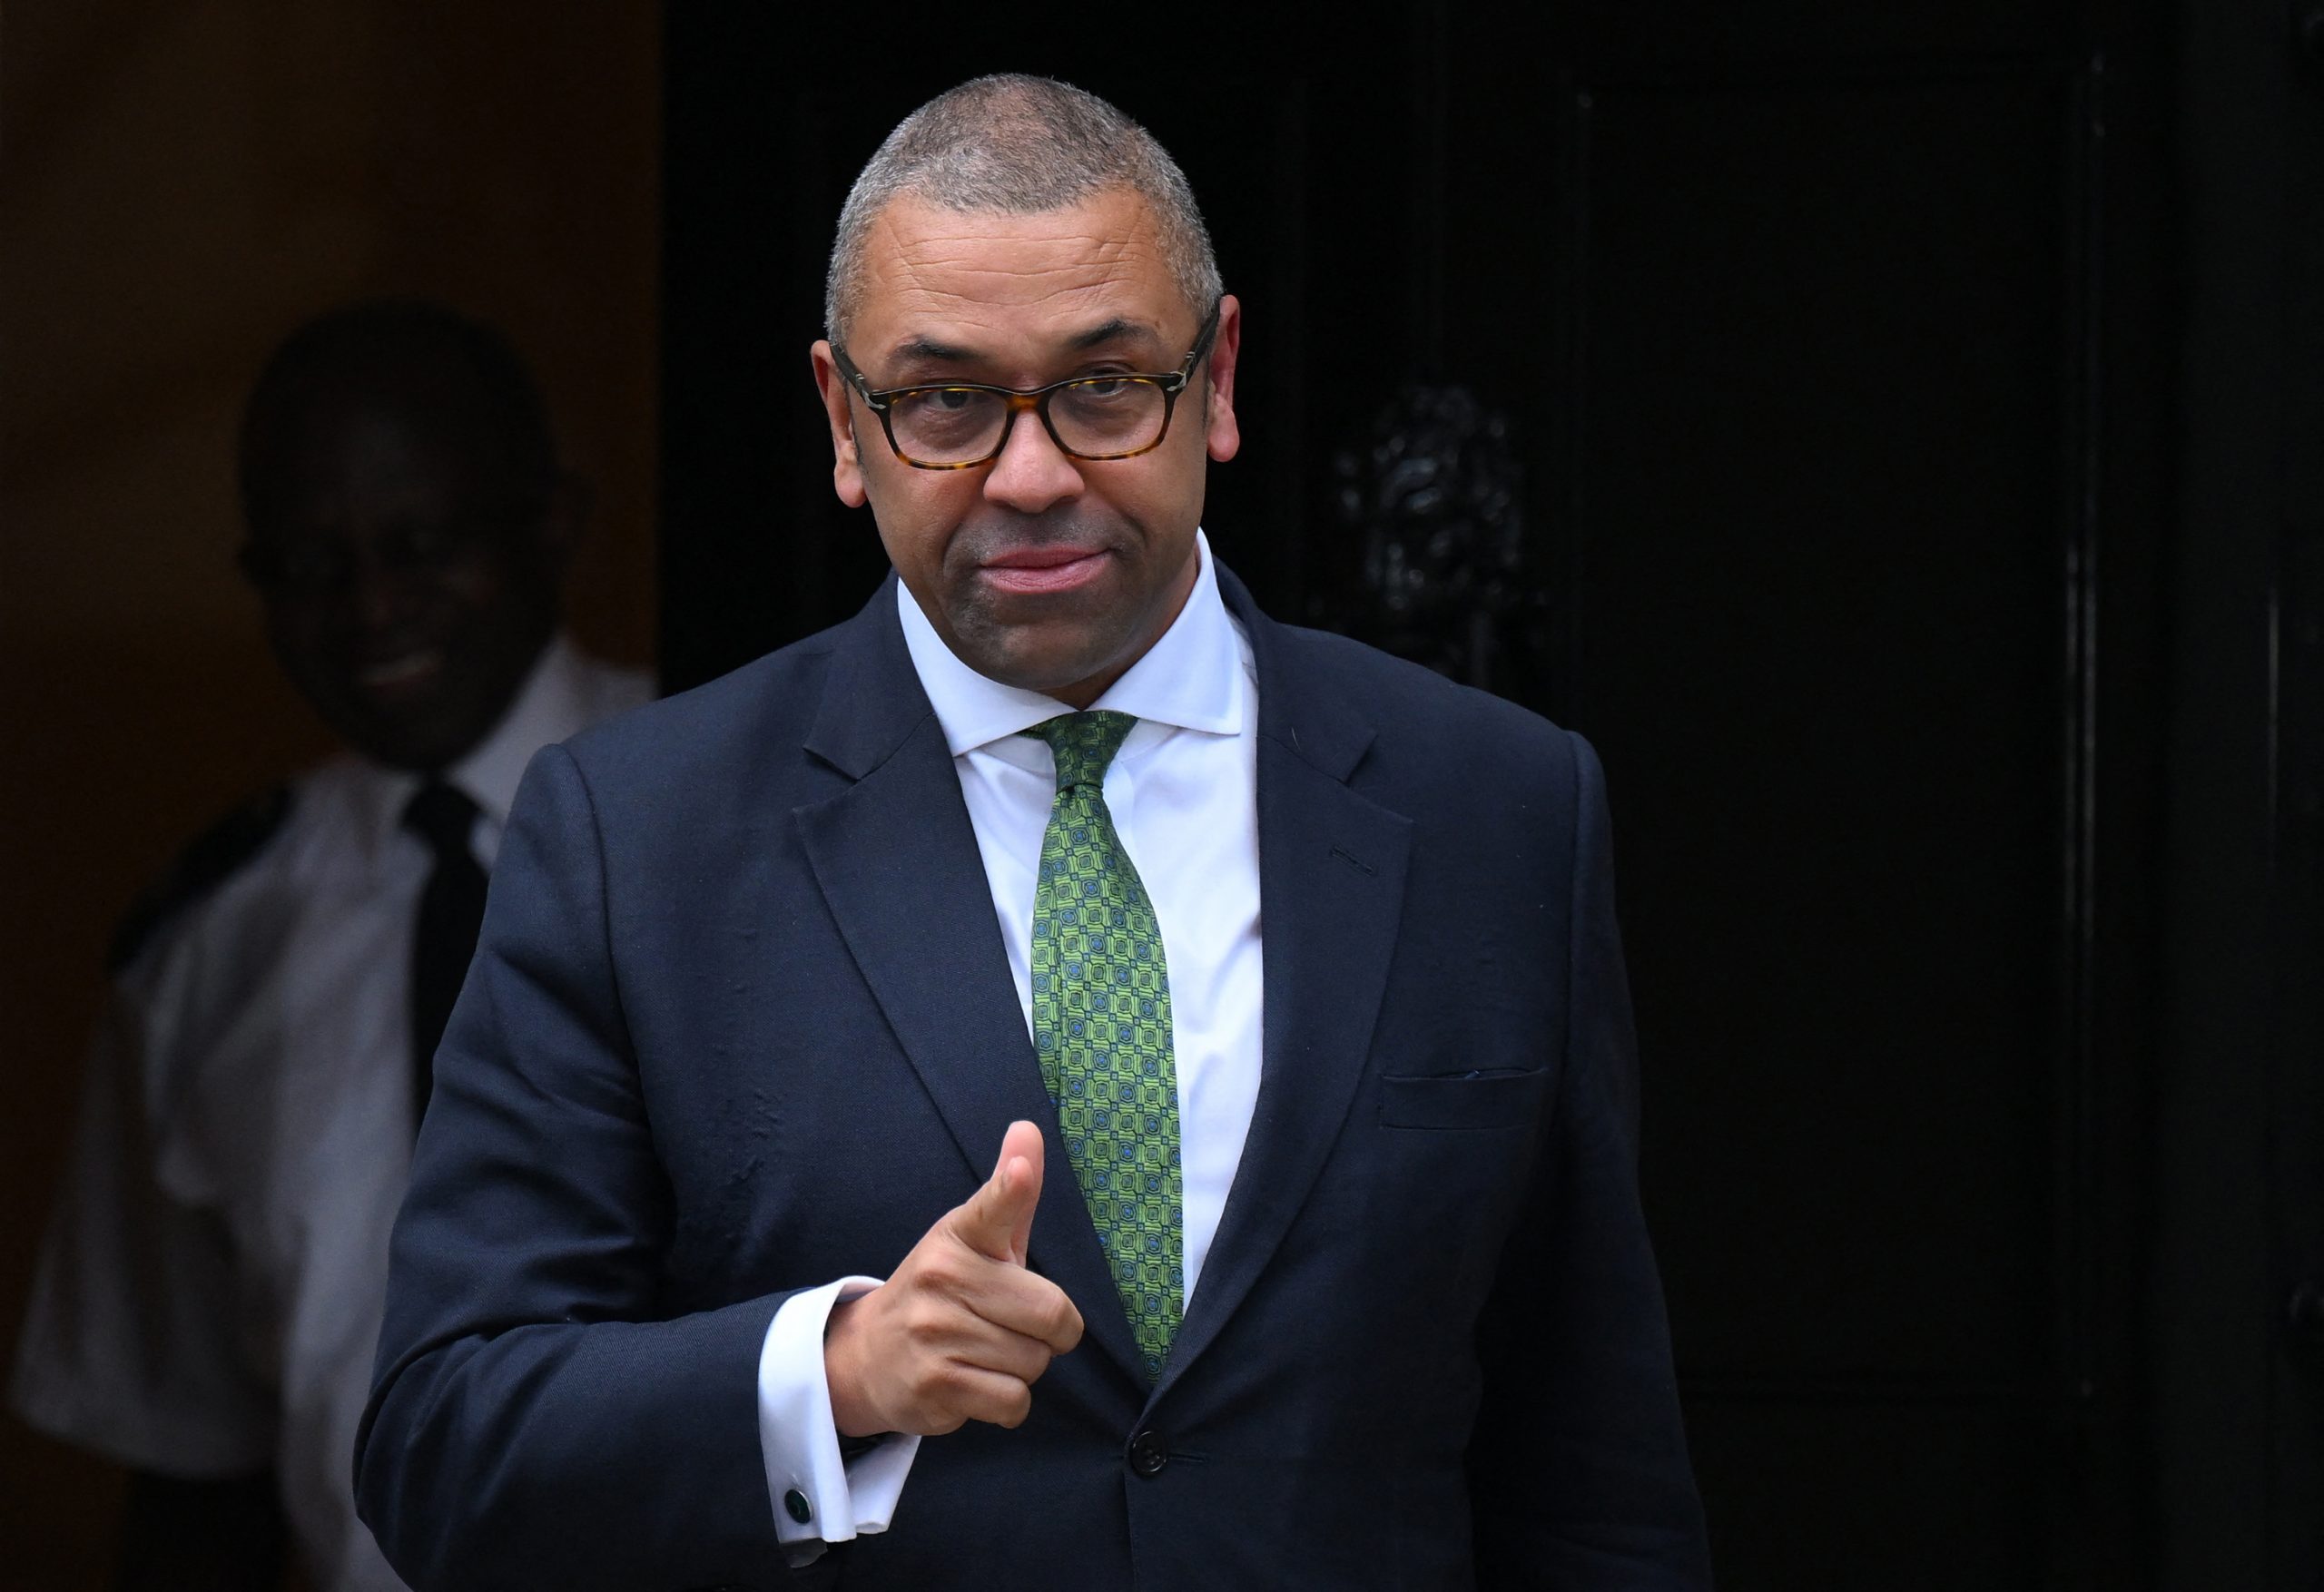 James Cleverly photo